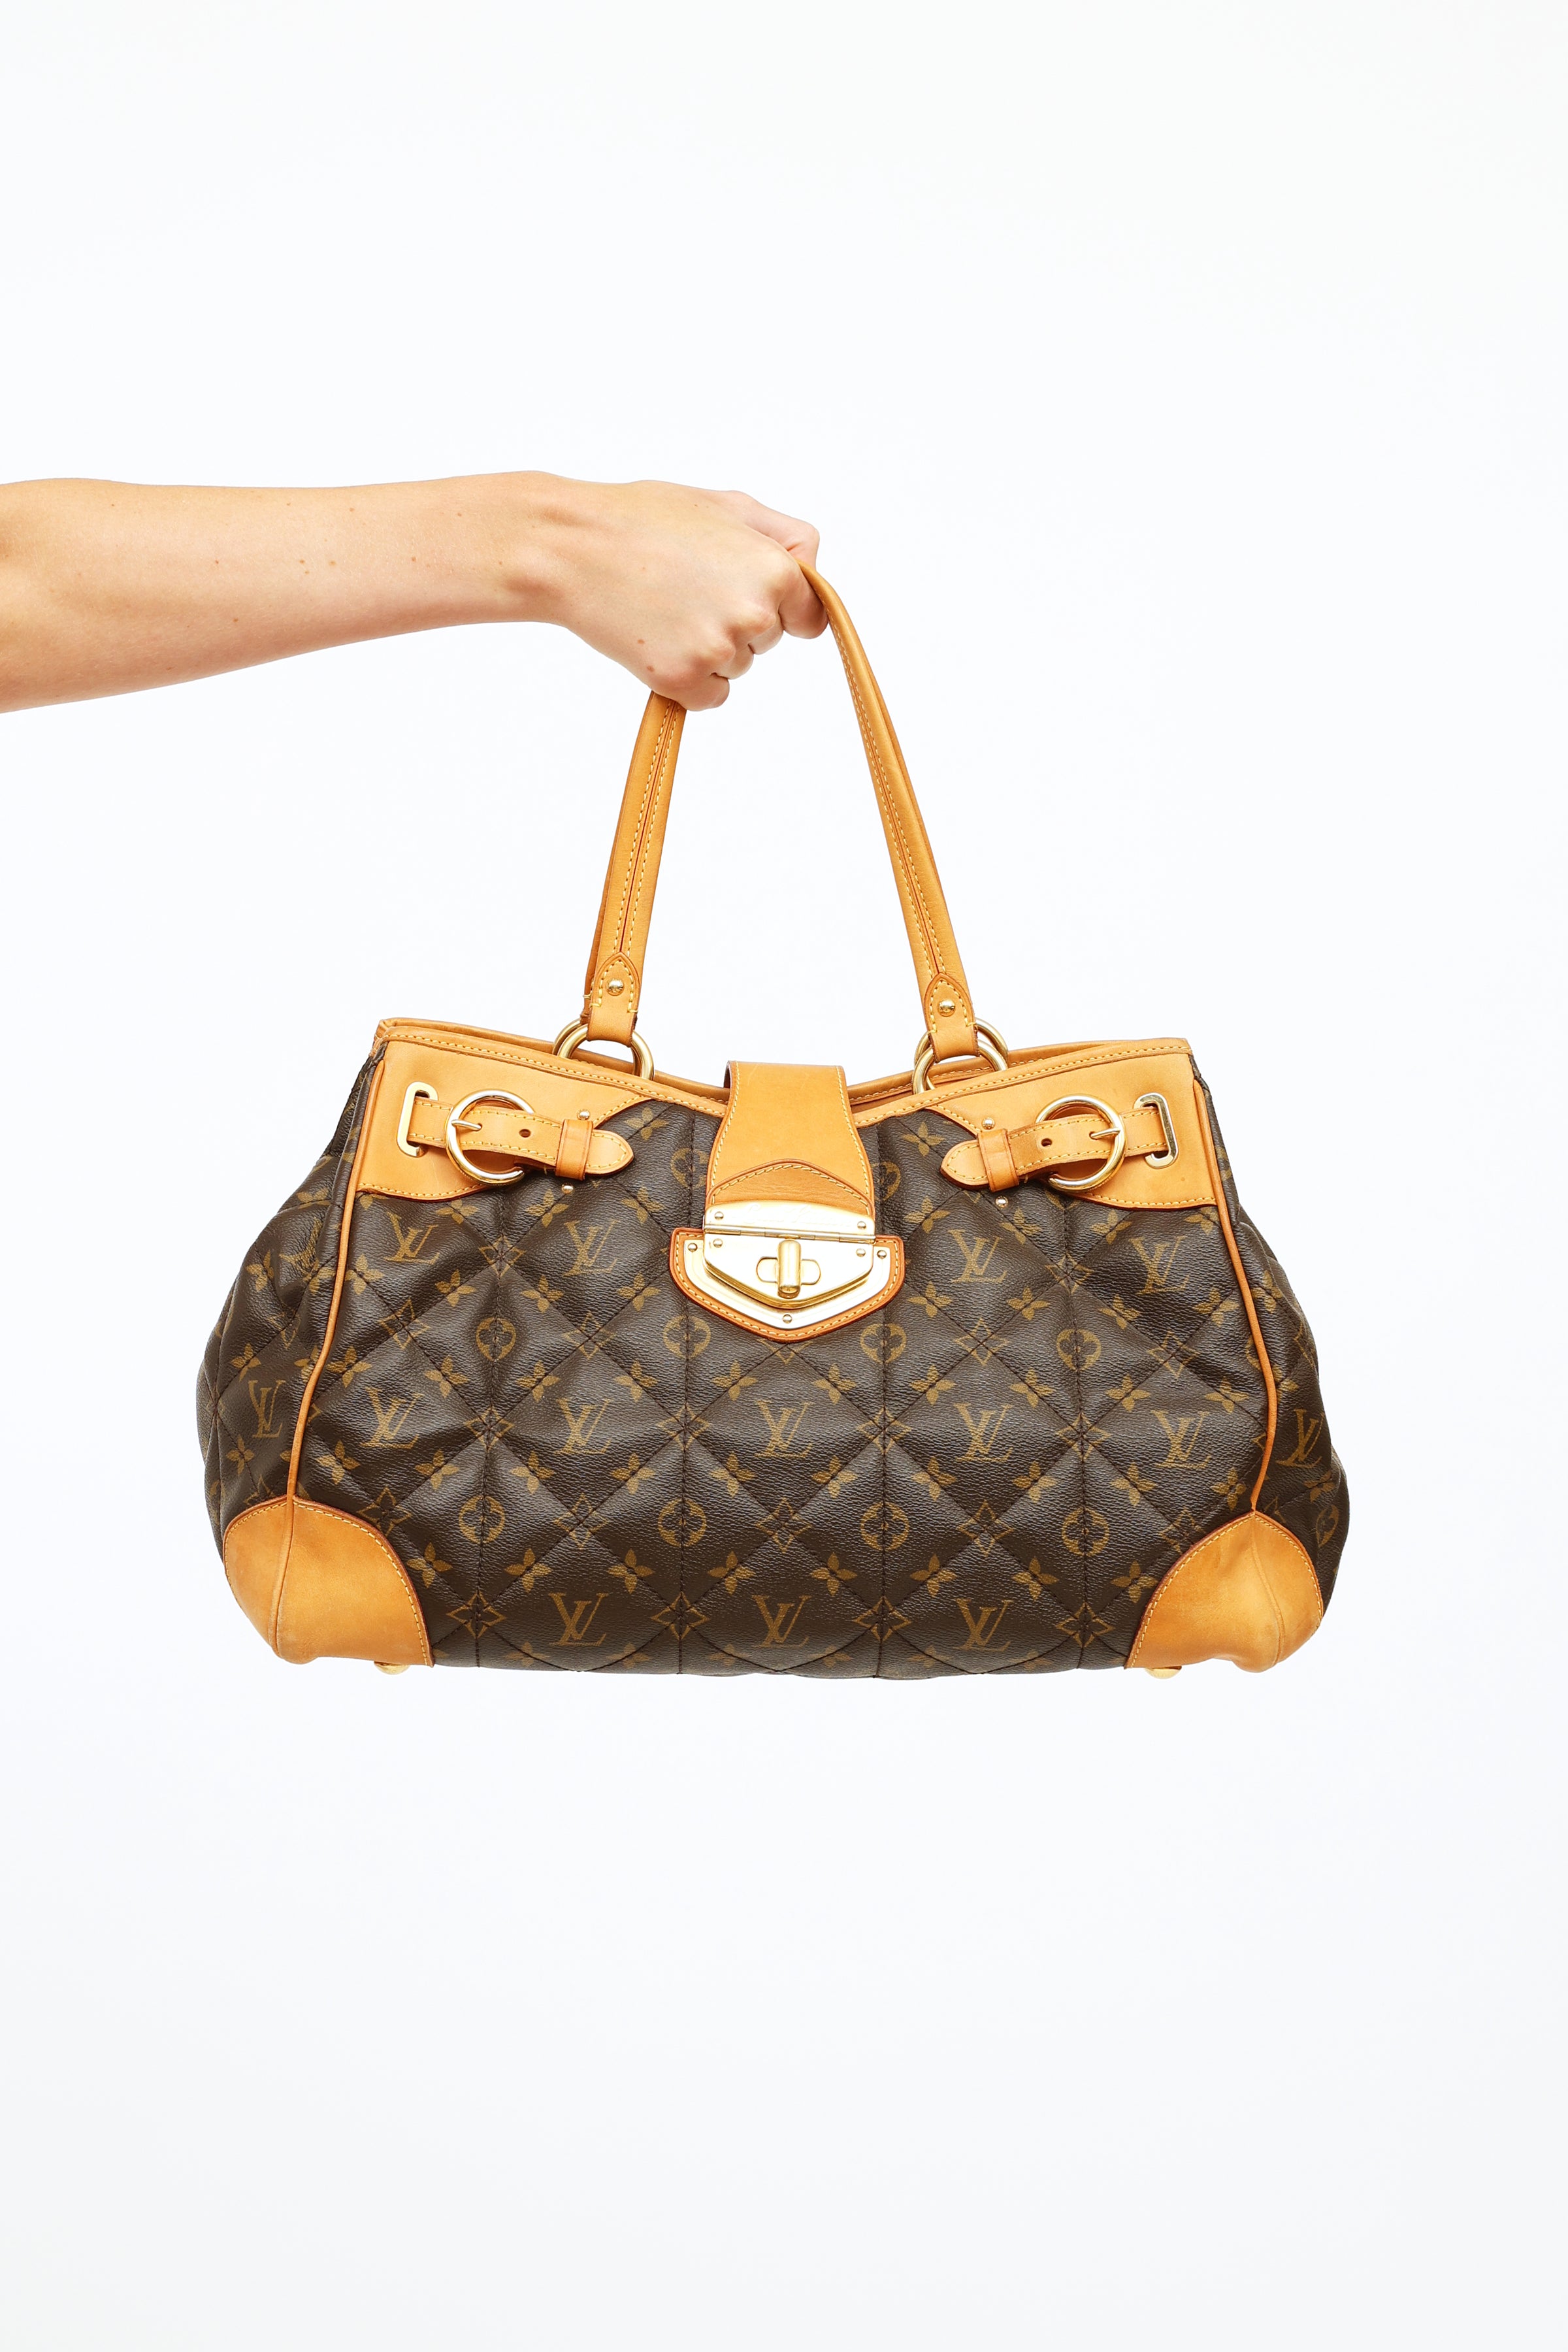 Lots of details on the Louis Vuitton Etoile Shoppers Tote. The